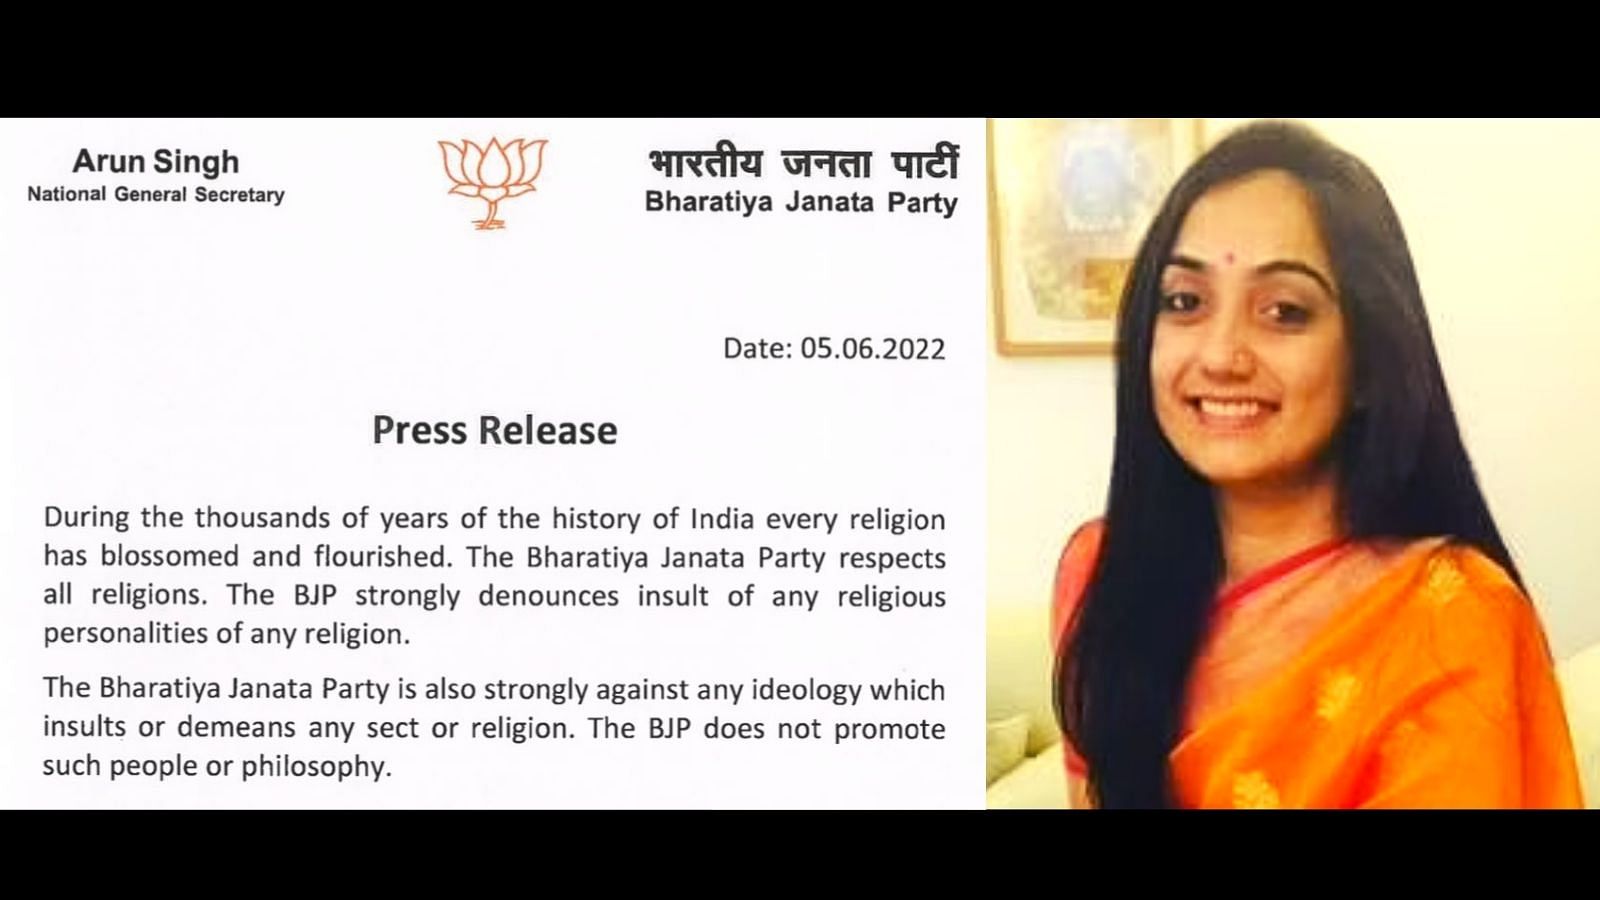 <div class="paragraphs"><p>Amid a row over remarks of BJP spokesperson Nupur Sharma, party general secretary Arun Singh said in a statement that the party is strongly against any ideology that insults or demeans any sect or religion.</p></div>